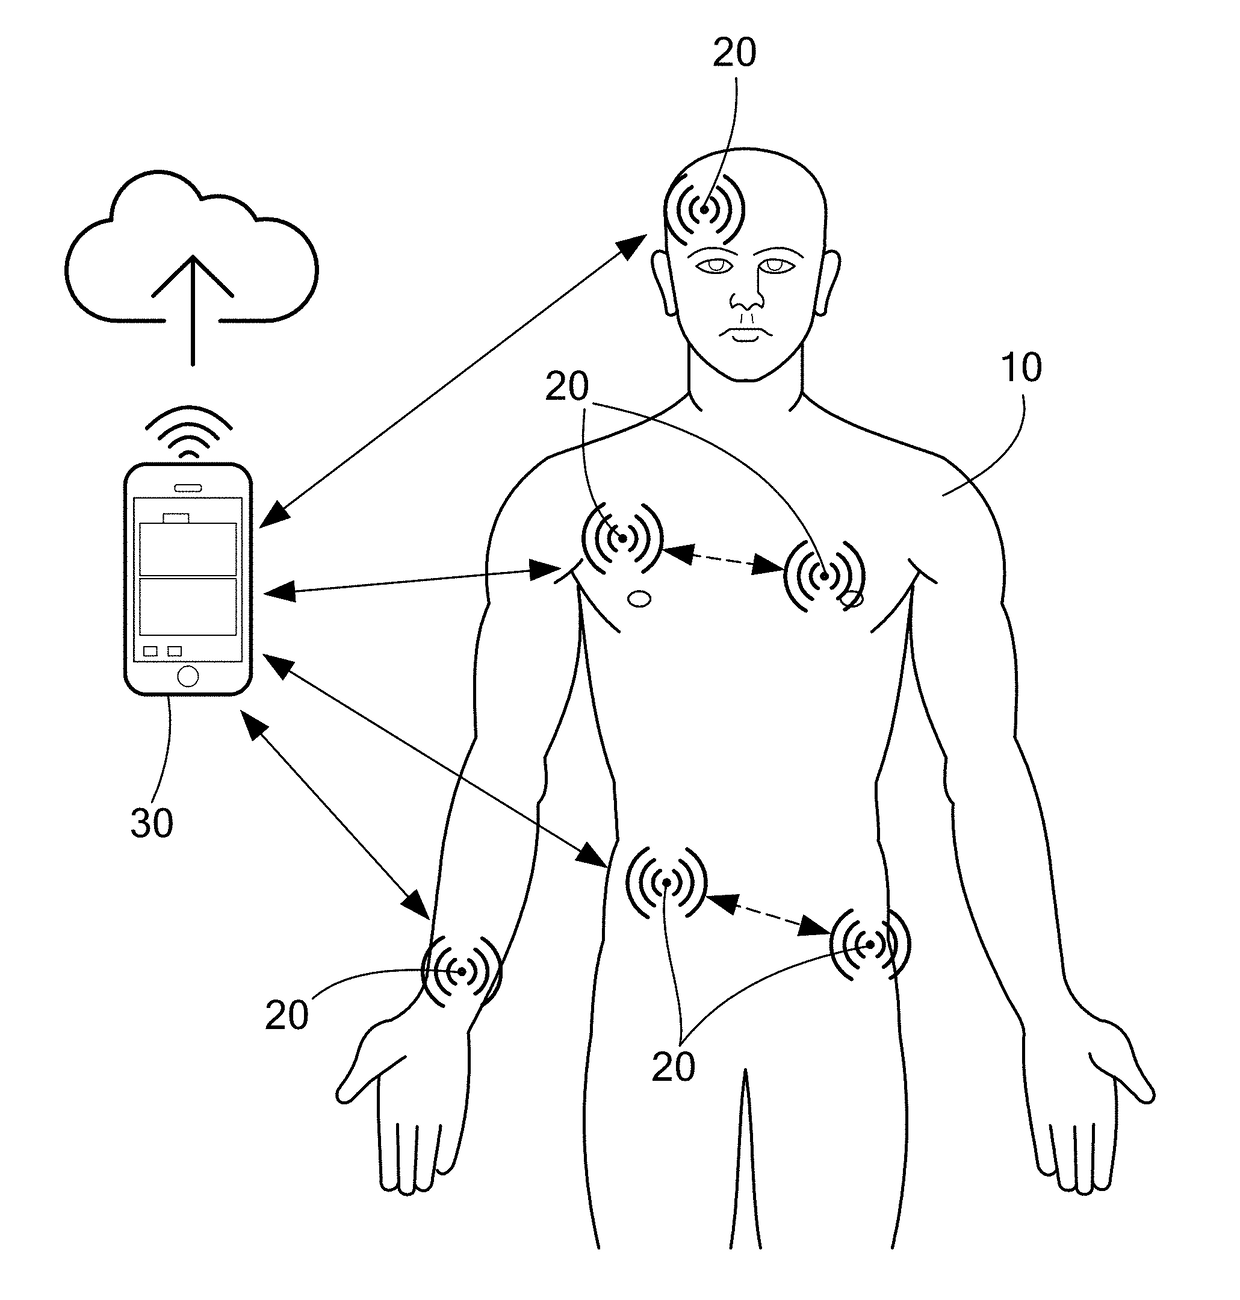 Ultrasonic Network for Wearable Devices